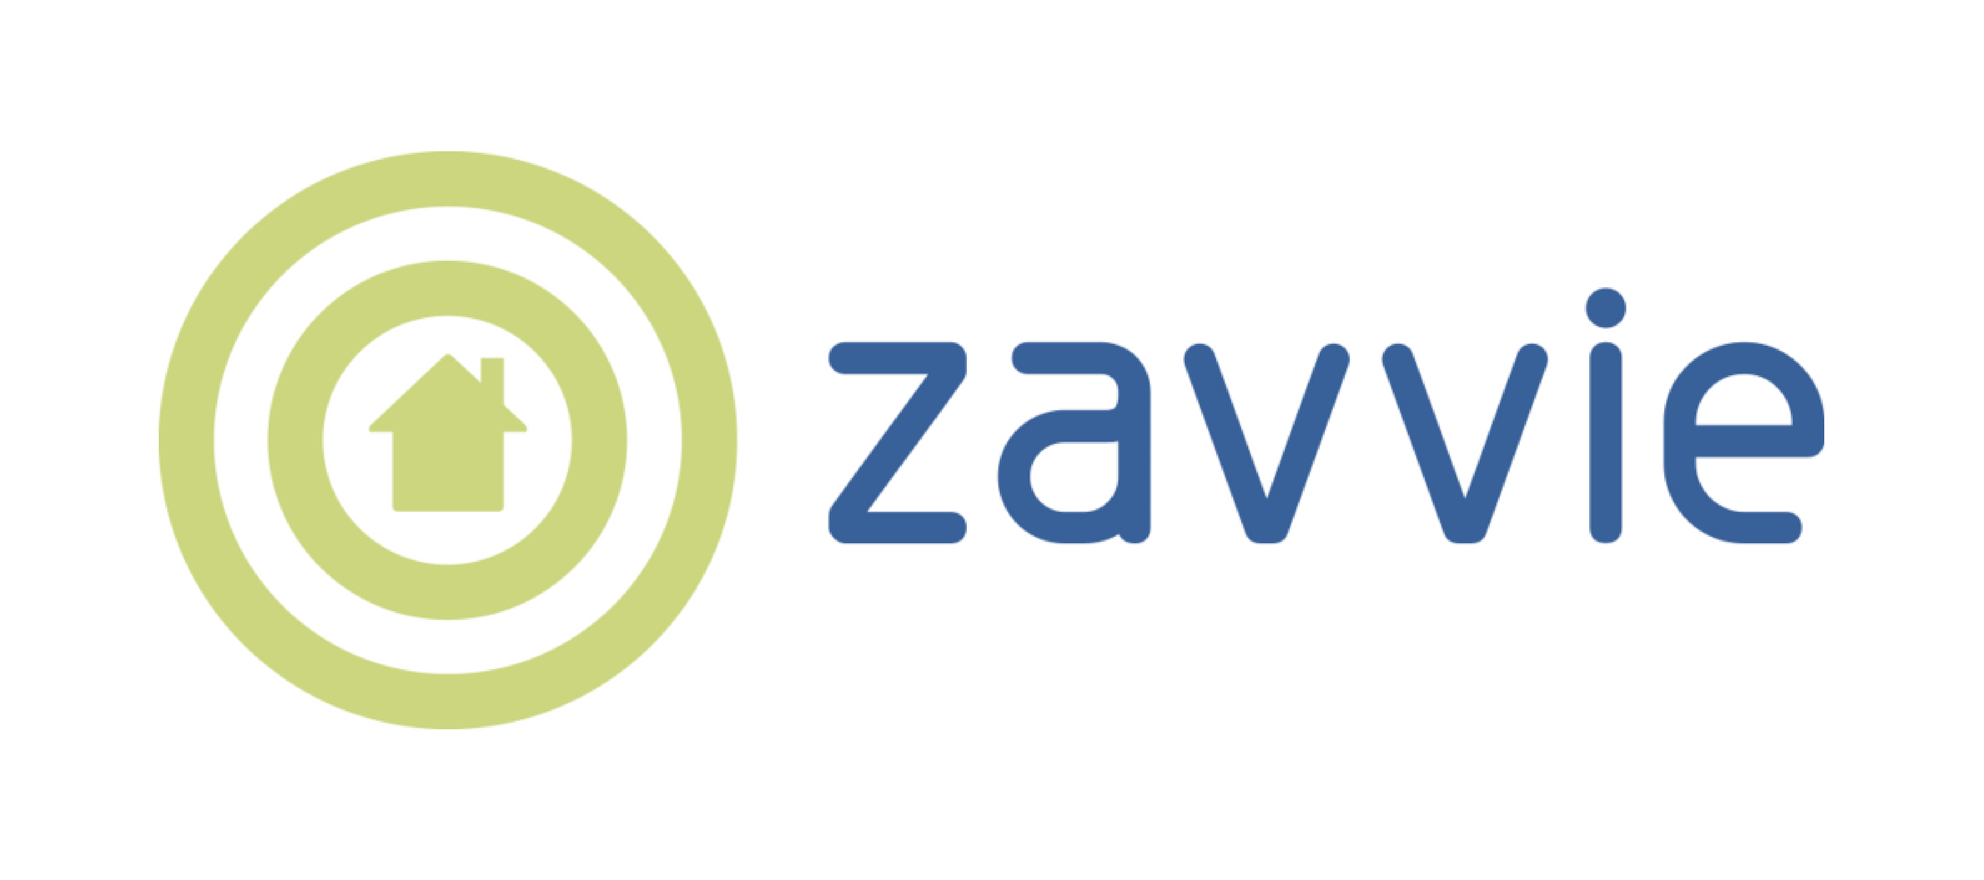 Zavvie is the tool that can help you become a local expert